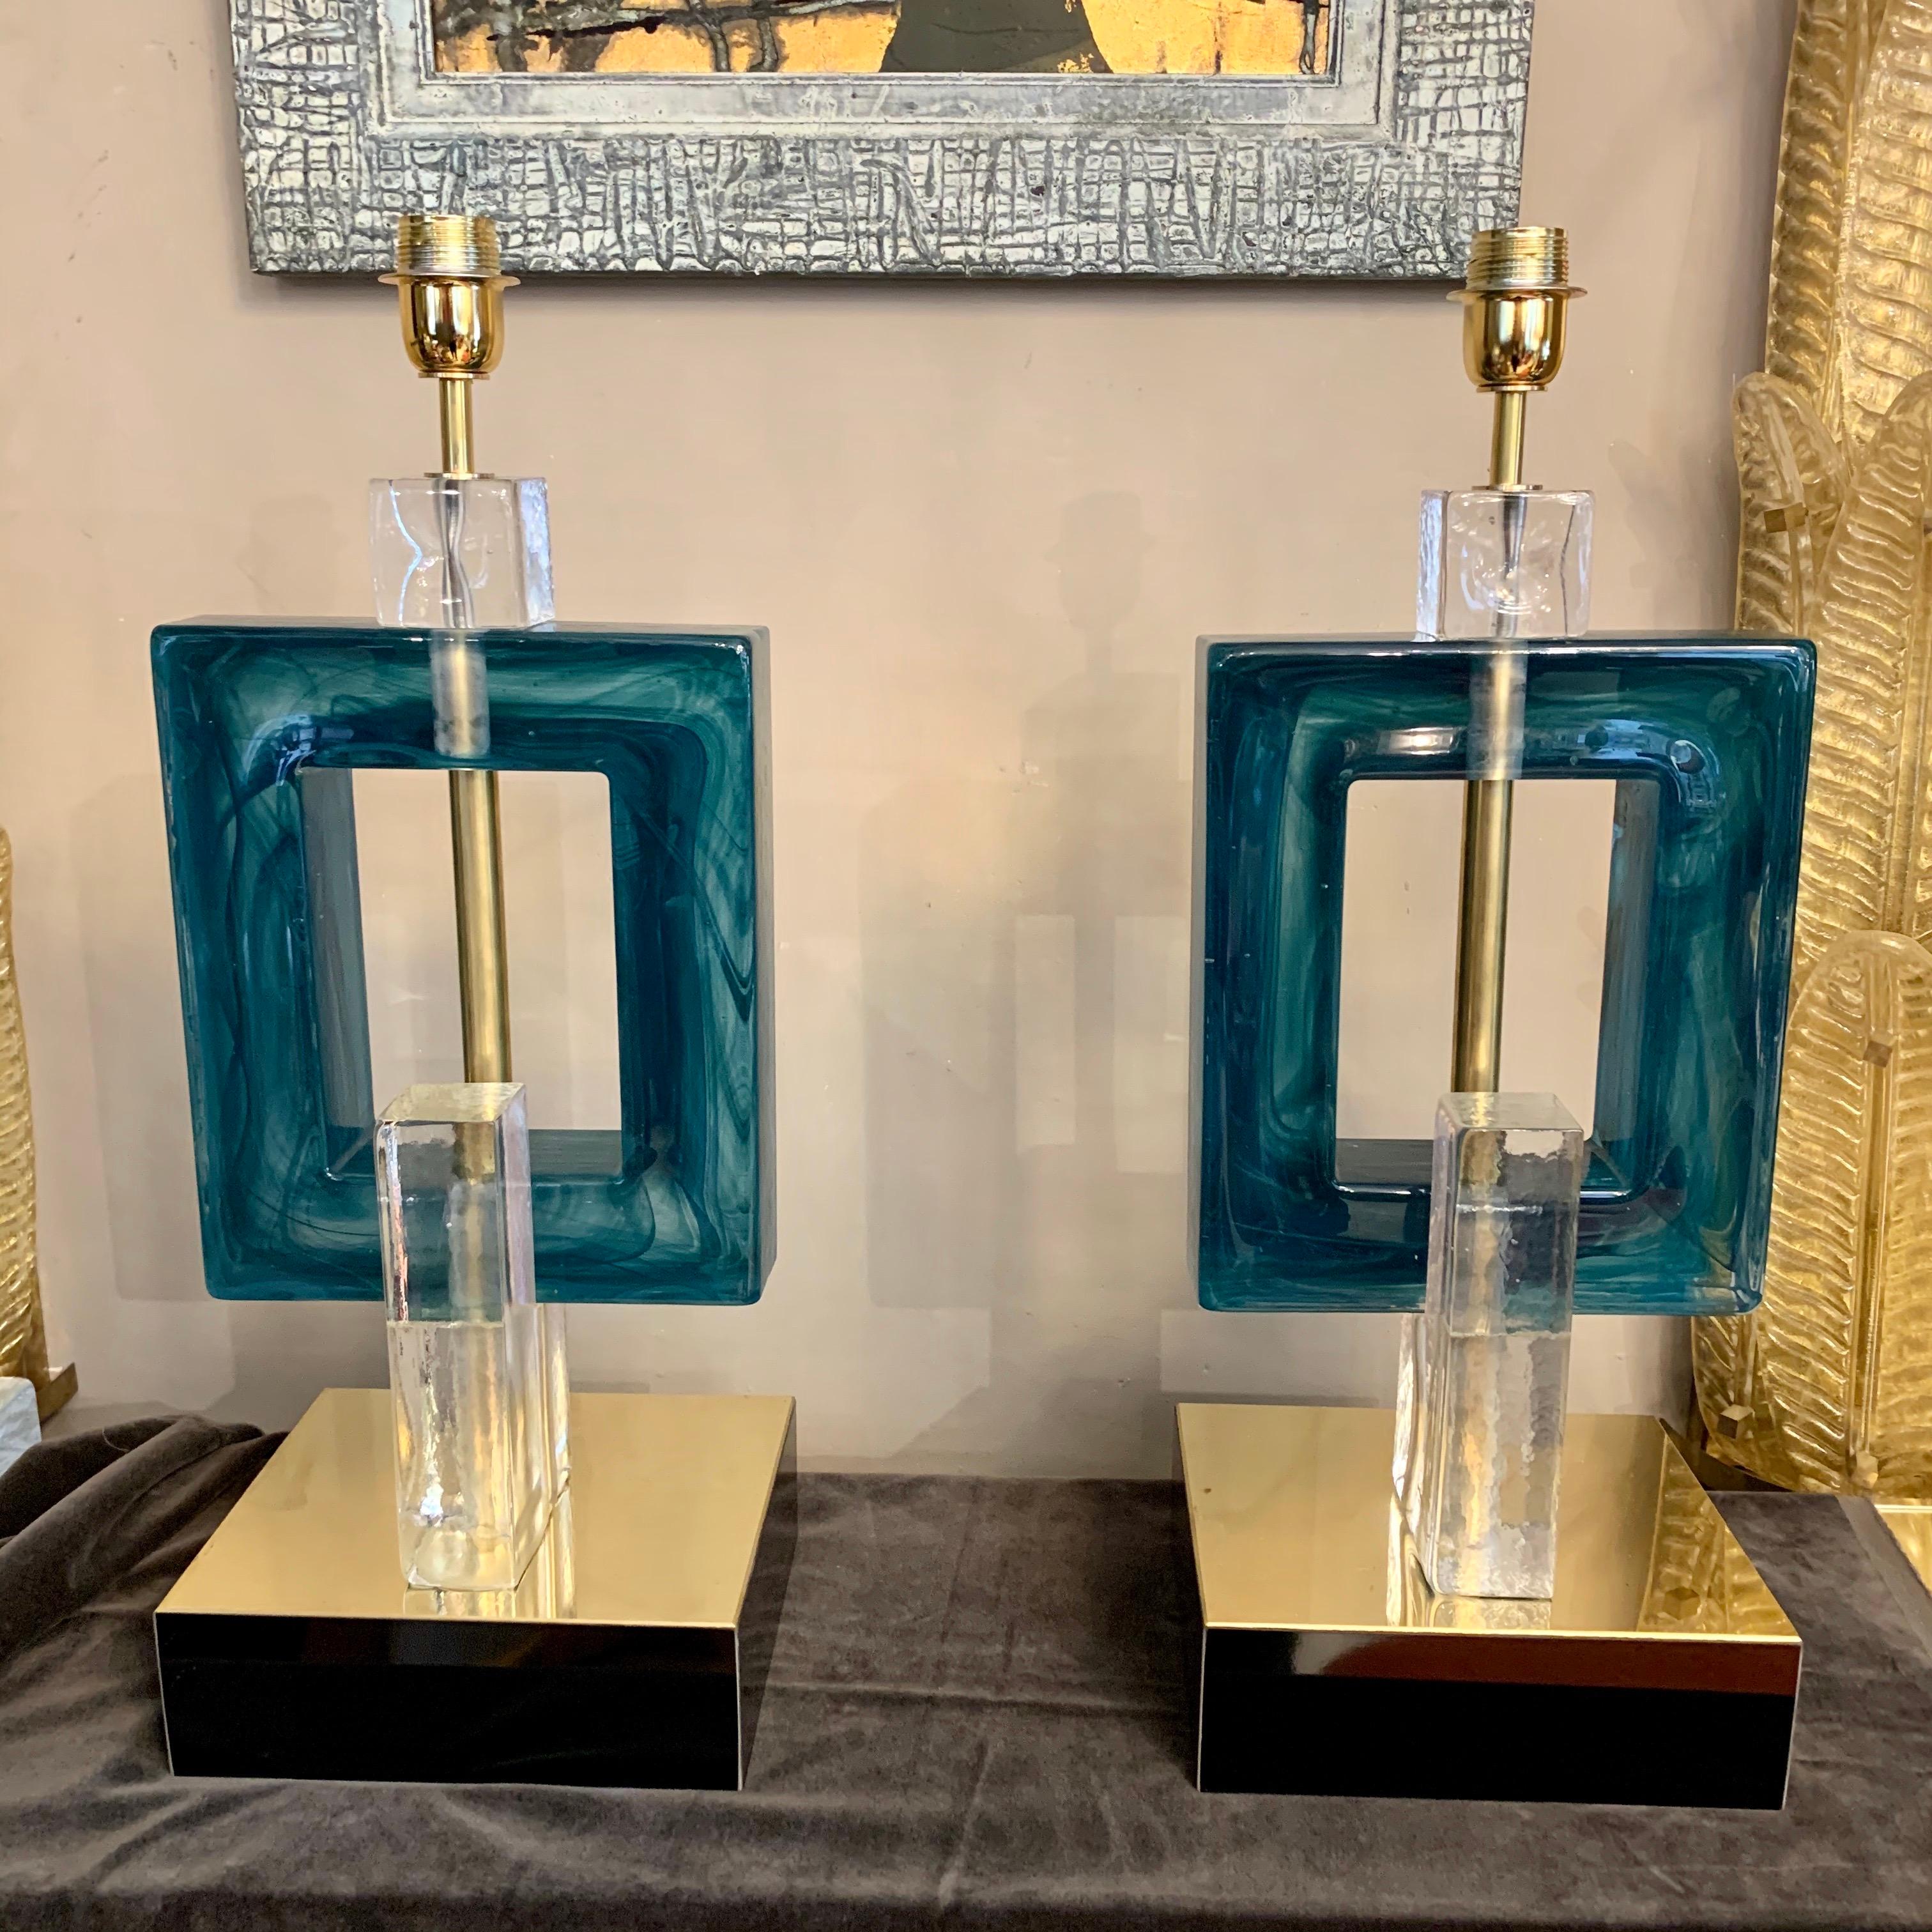 Pair of petrol green Murano table lamps, green melange handmade full and heavy glass blocks, black lacquered wood base with brass top. Customized designs lampshades are handcrafted in our shop by us on request.